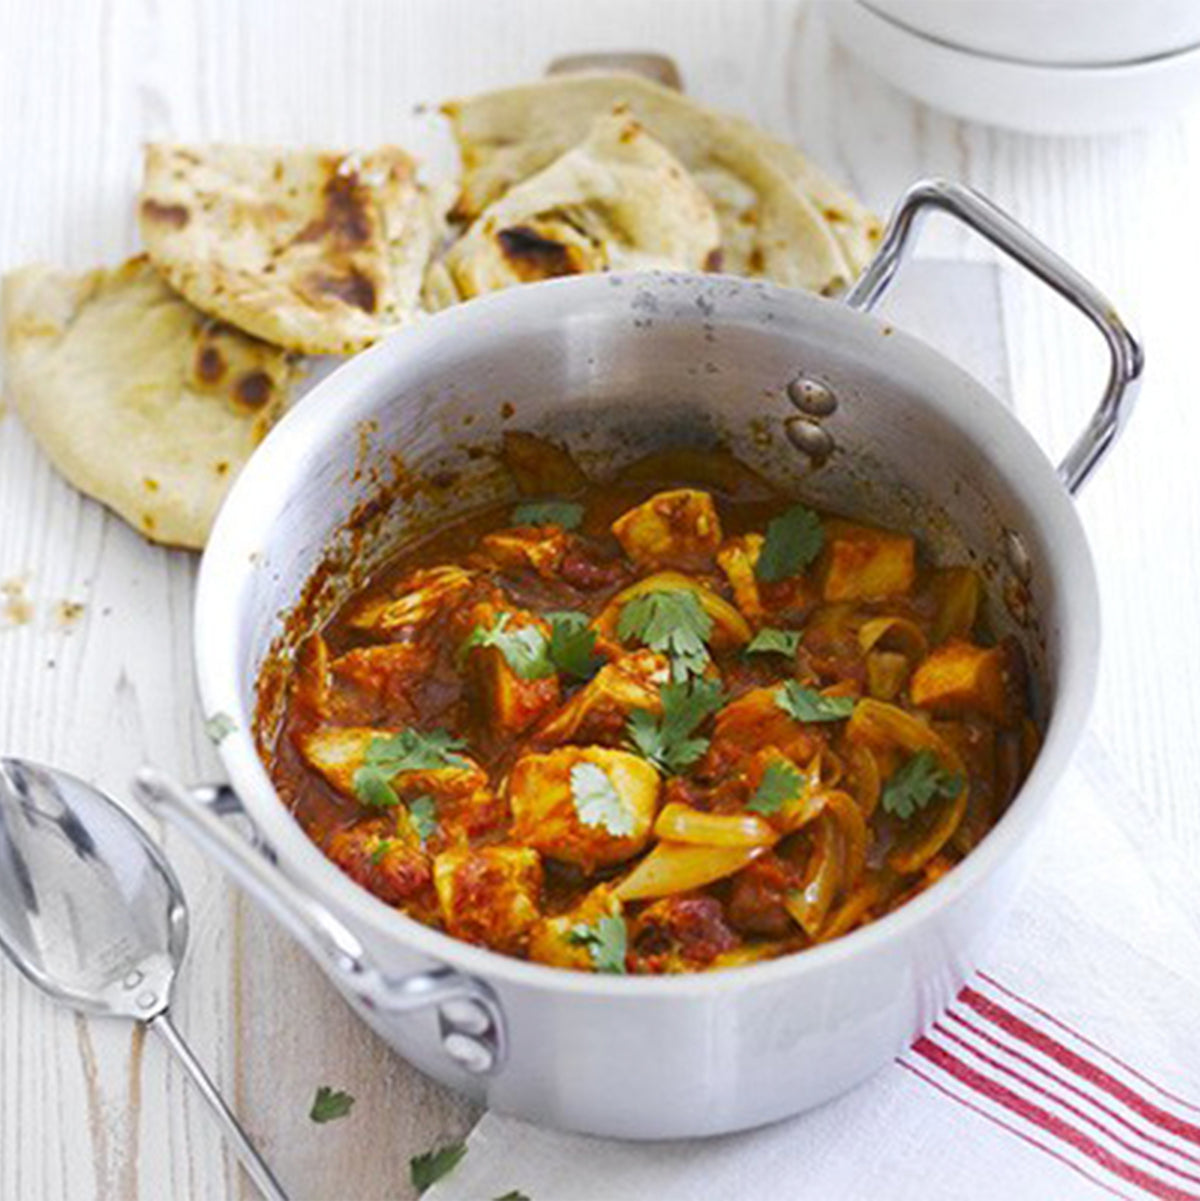 A Curry Lover's Guide to Making the Most of Your Christmas Leftovers